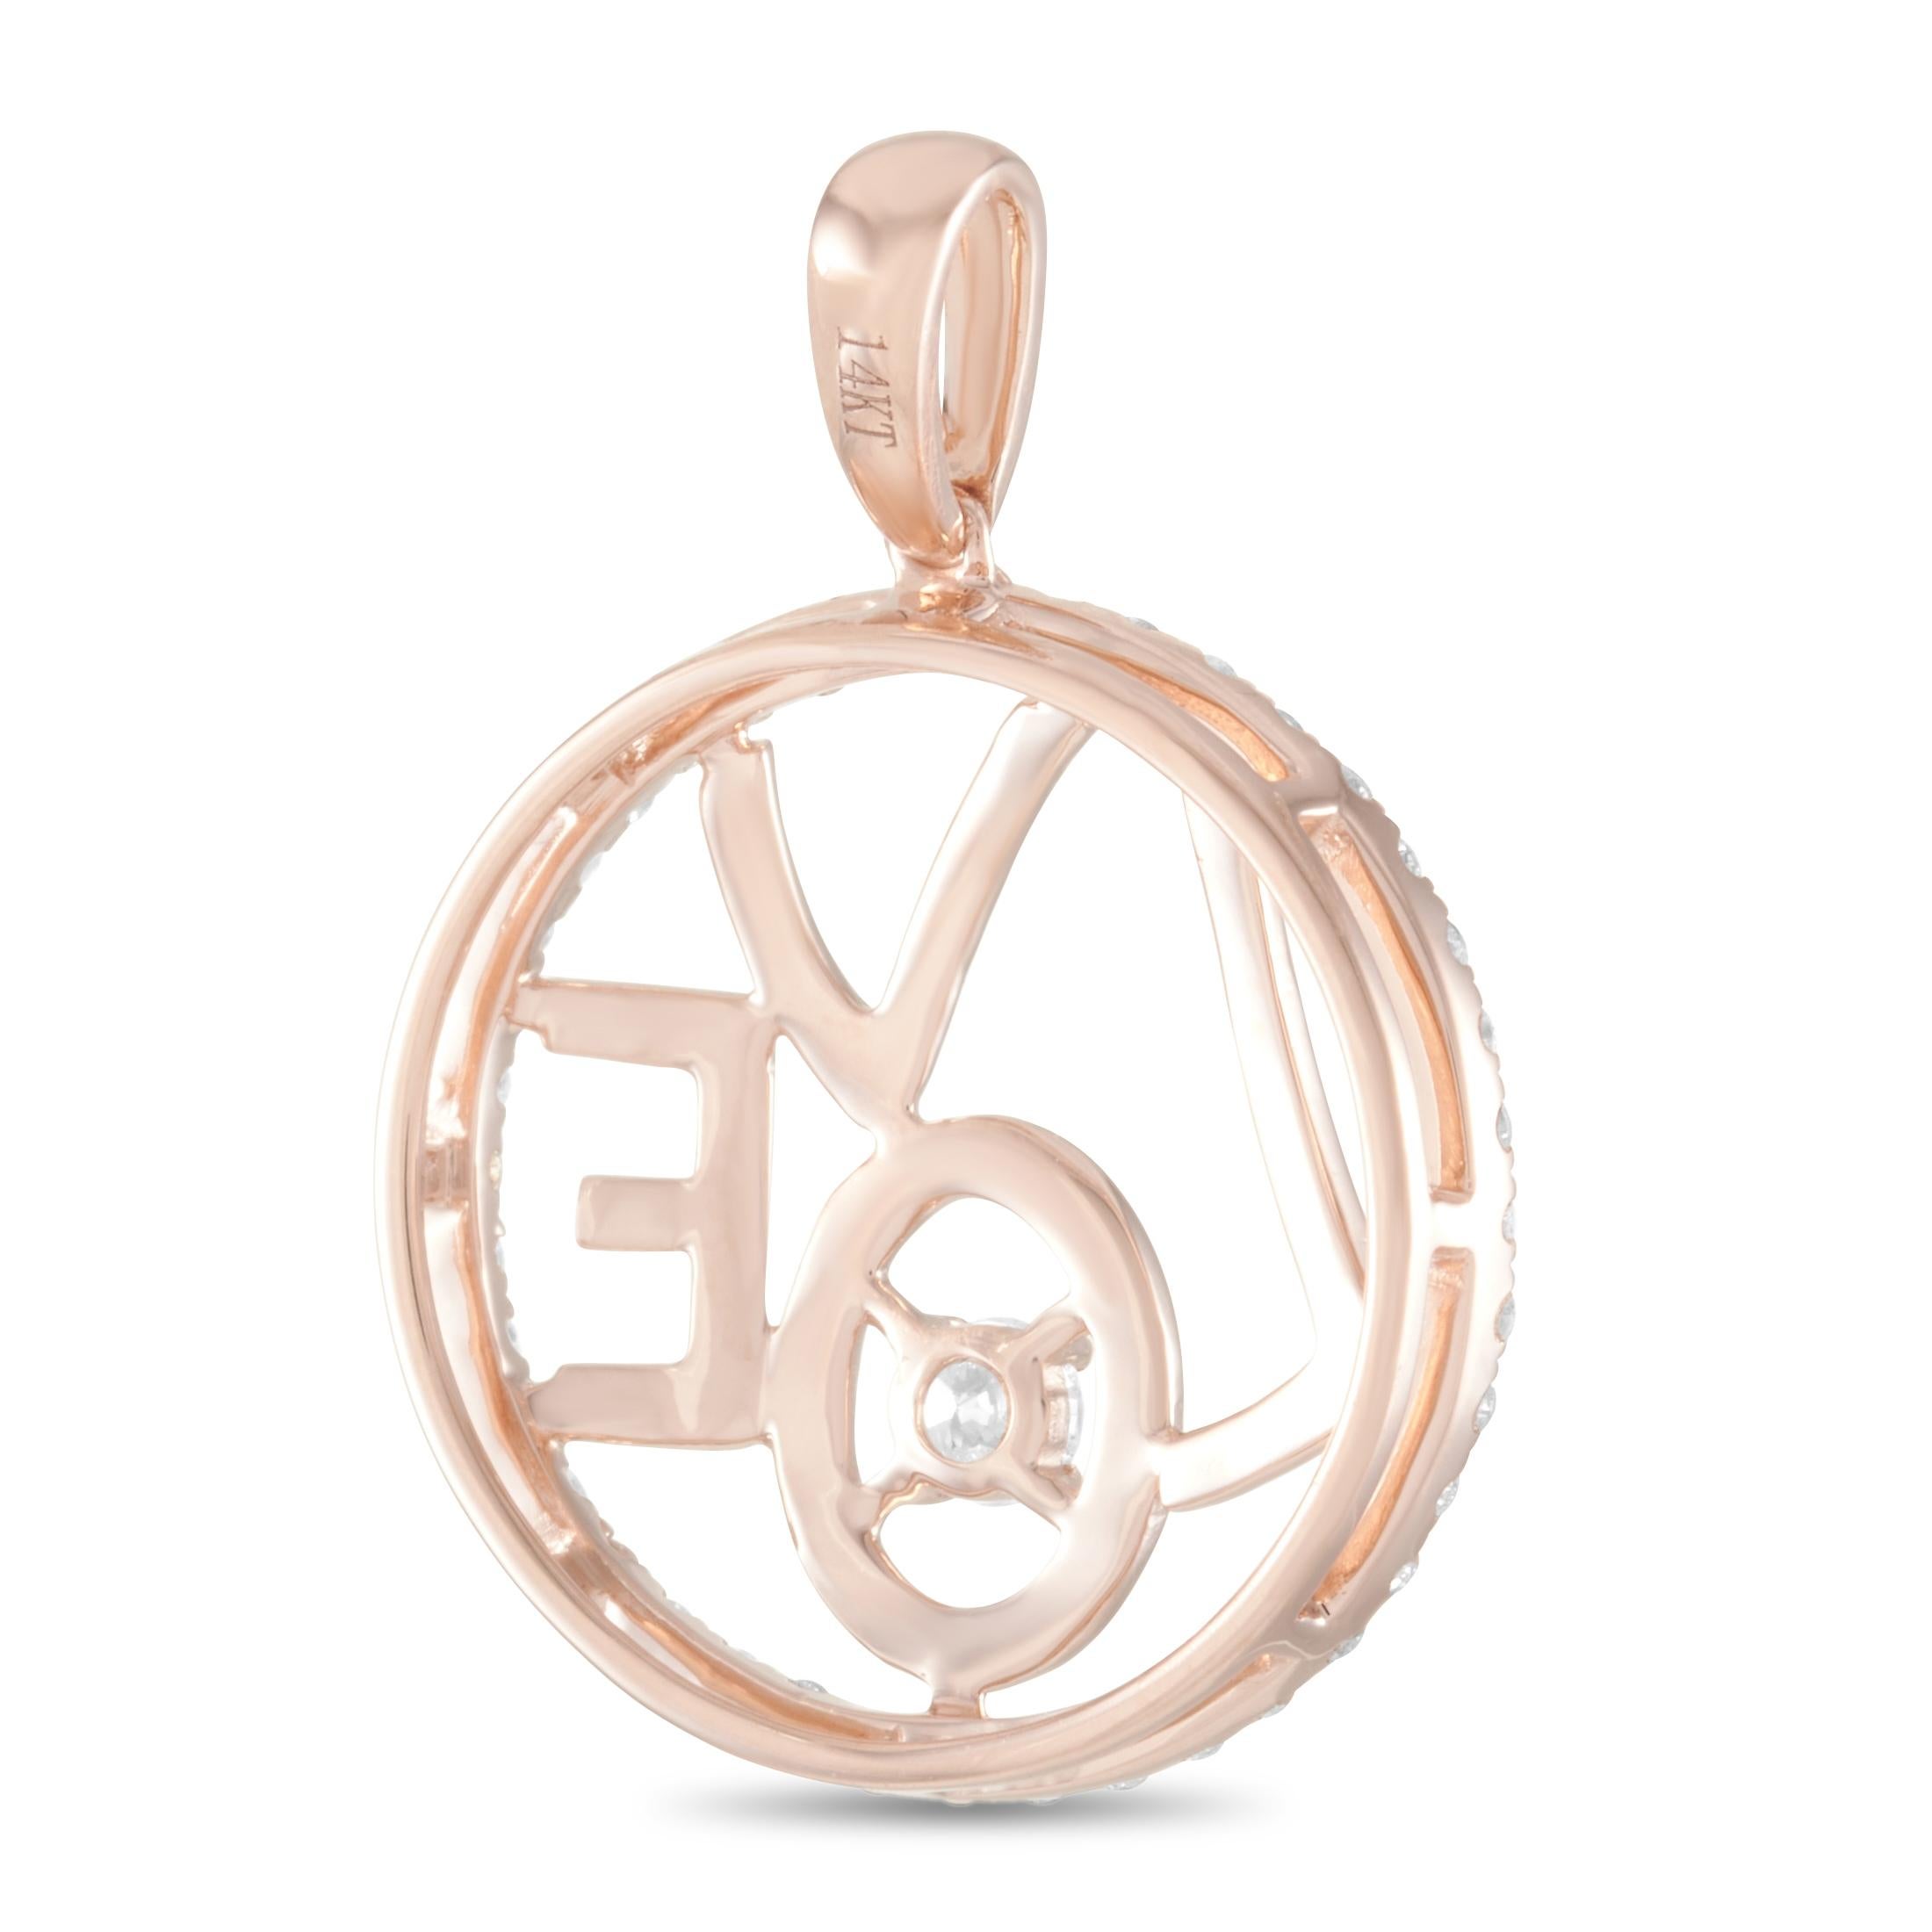 This LB Exclusive pendant is crafted from 14K rose gold and weighs 2.2 grams. It measures 0.88” in length and 0.63” in width. The pendant is set with diamonds that total 0.30 carats.
 
 Offered in brand new condition, this item includes a gift box.